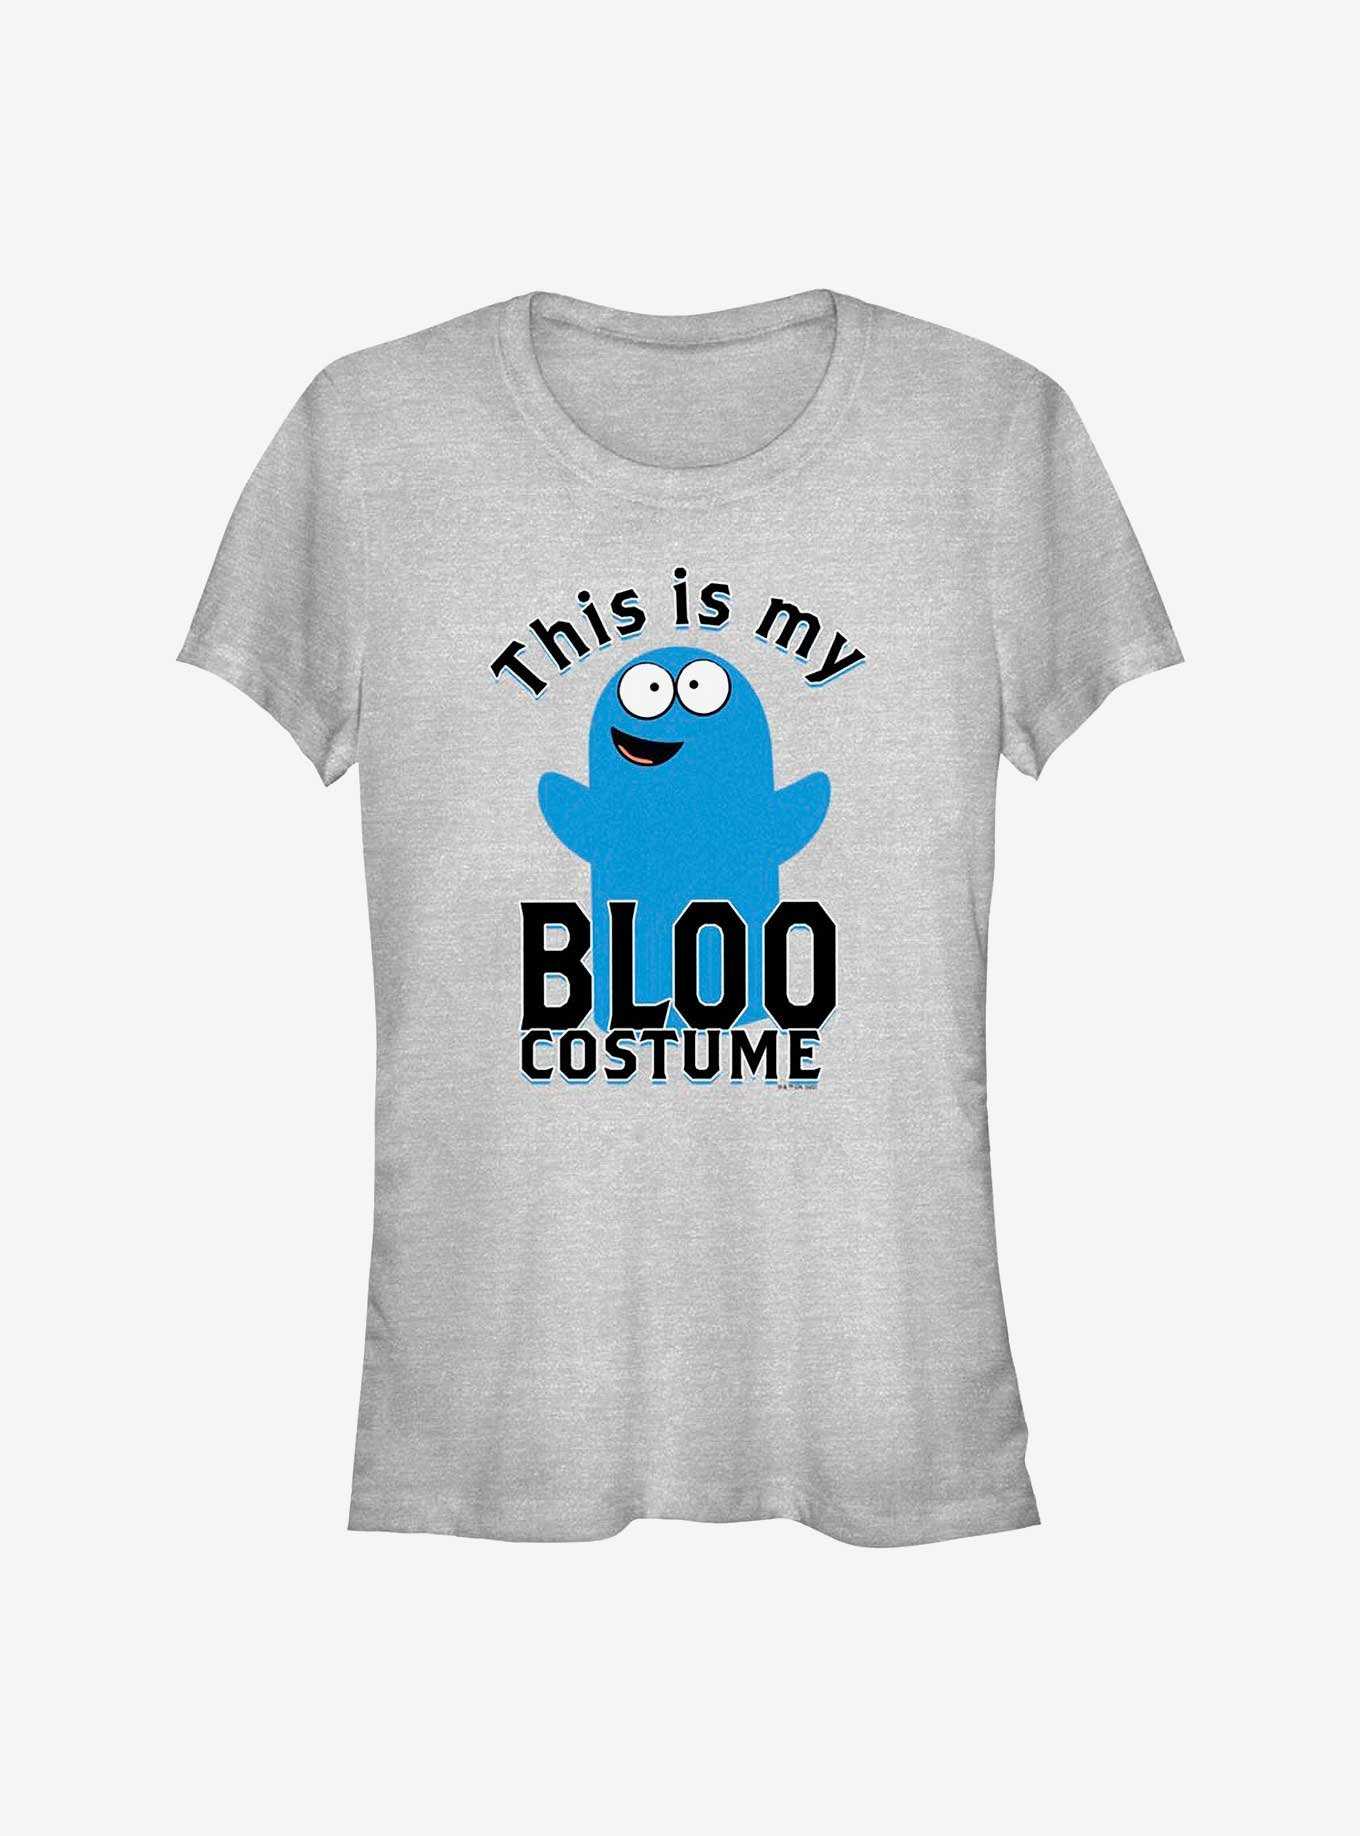 Cartoon Network Foster's Home for Imaginary Friends My Bloo Costume Girls T-Shirt, , hi-res